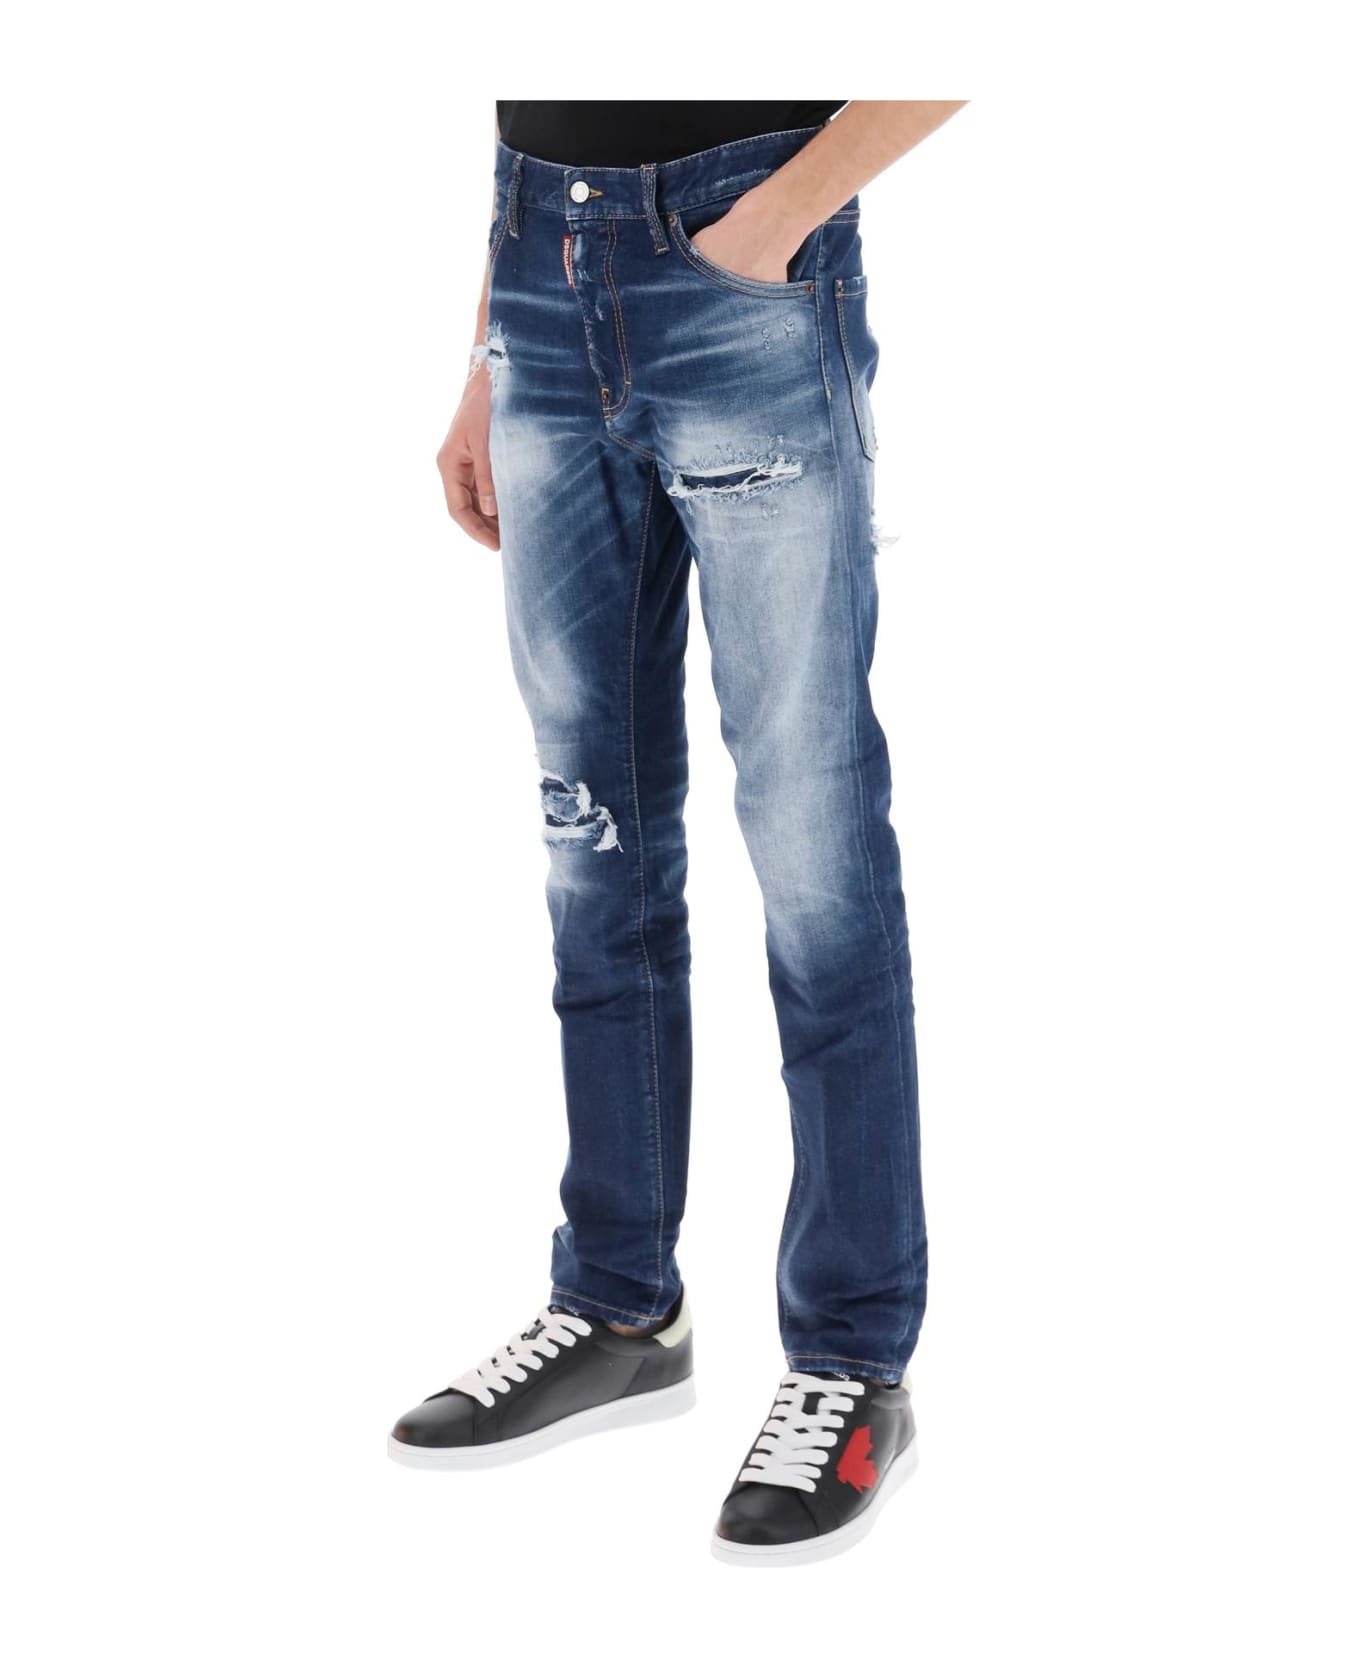 Dsquared2 Cool Guy Jeans In Medium Worn Out Booty Wash - NAVY BLUE (Blue)